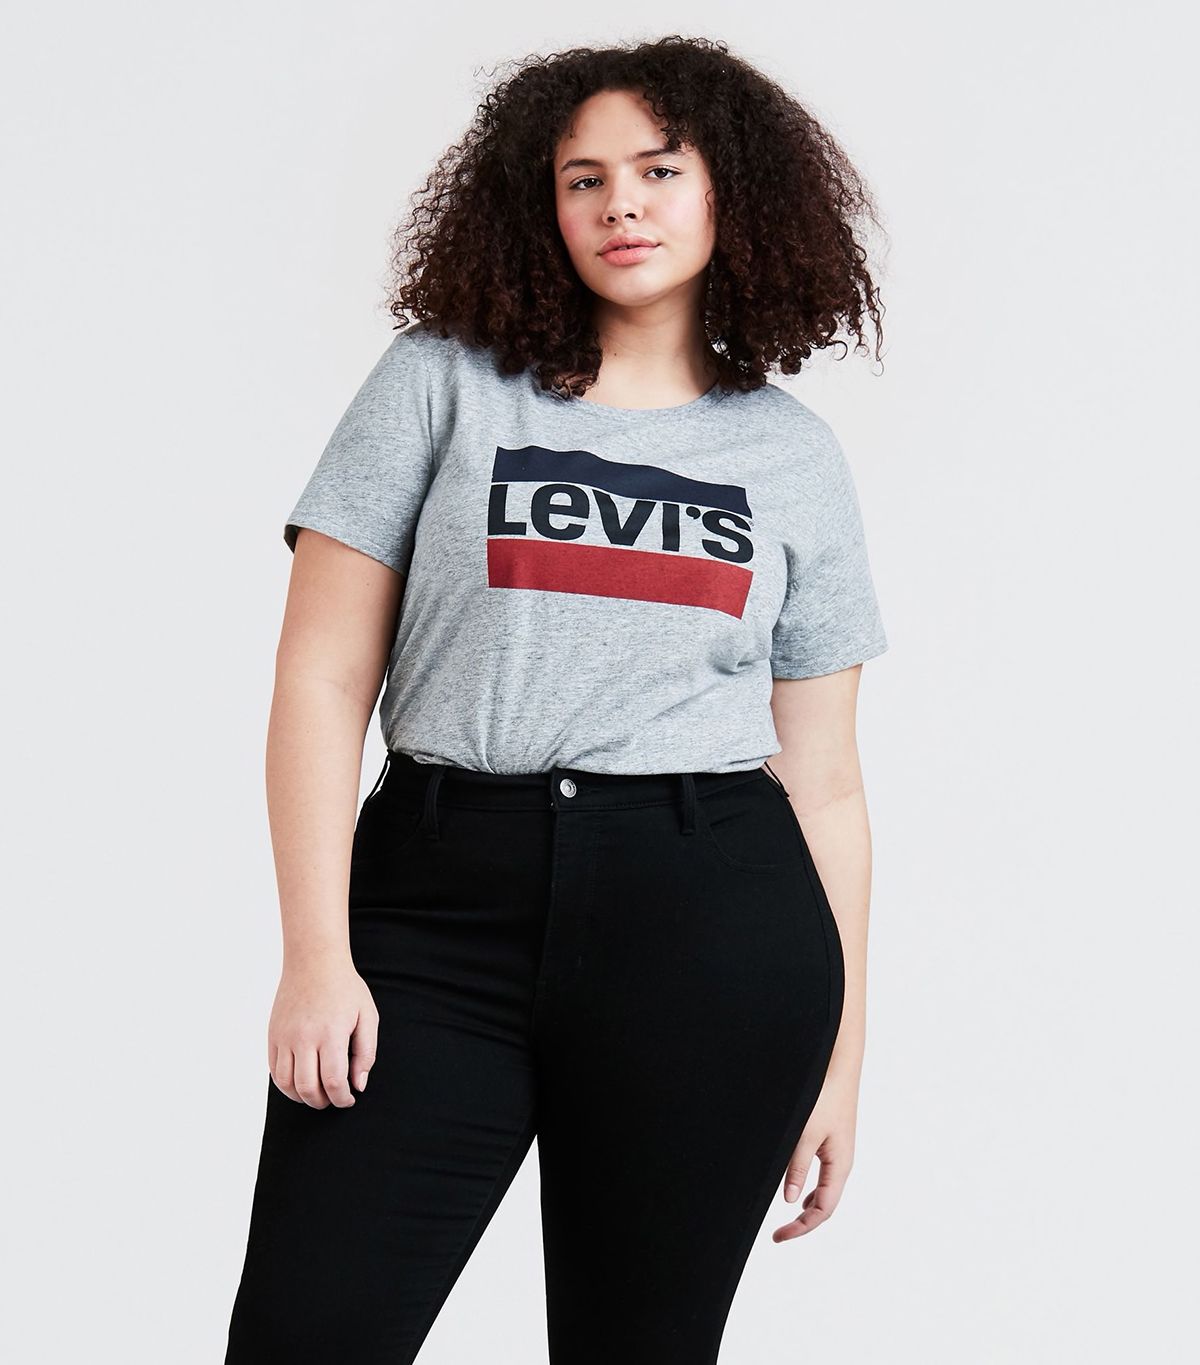 Levi's Logo T-Shirts Are Extremely Popular | Who What Wear